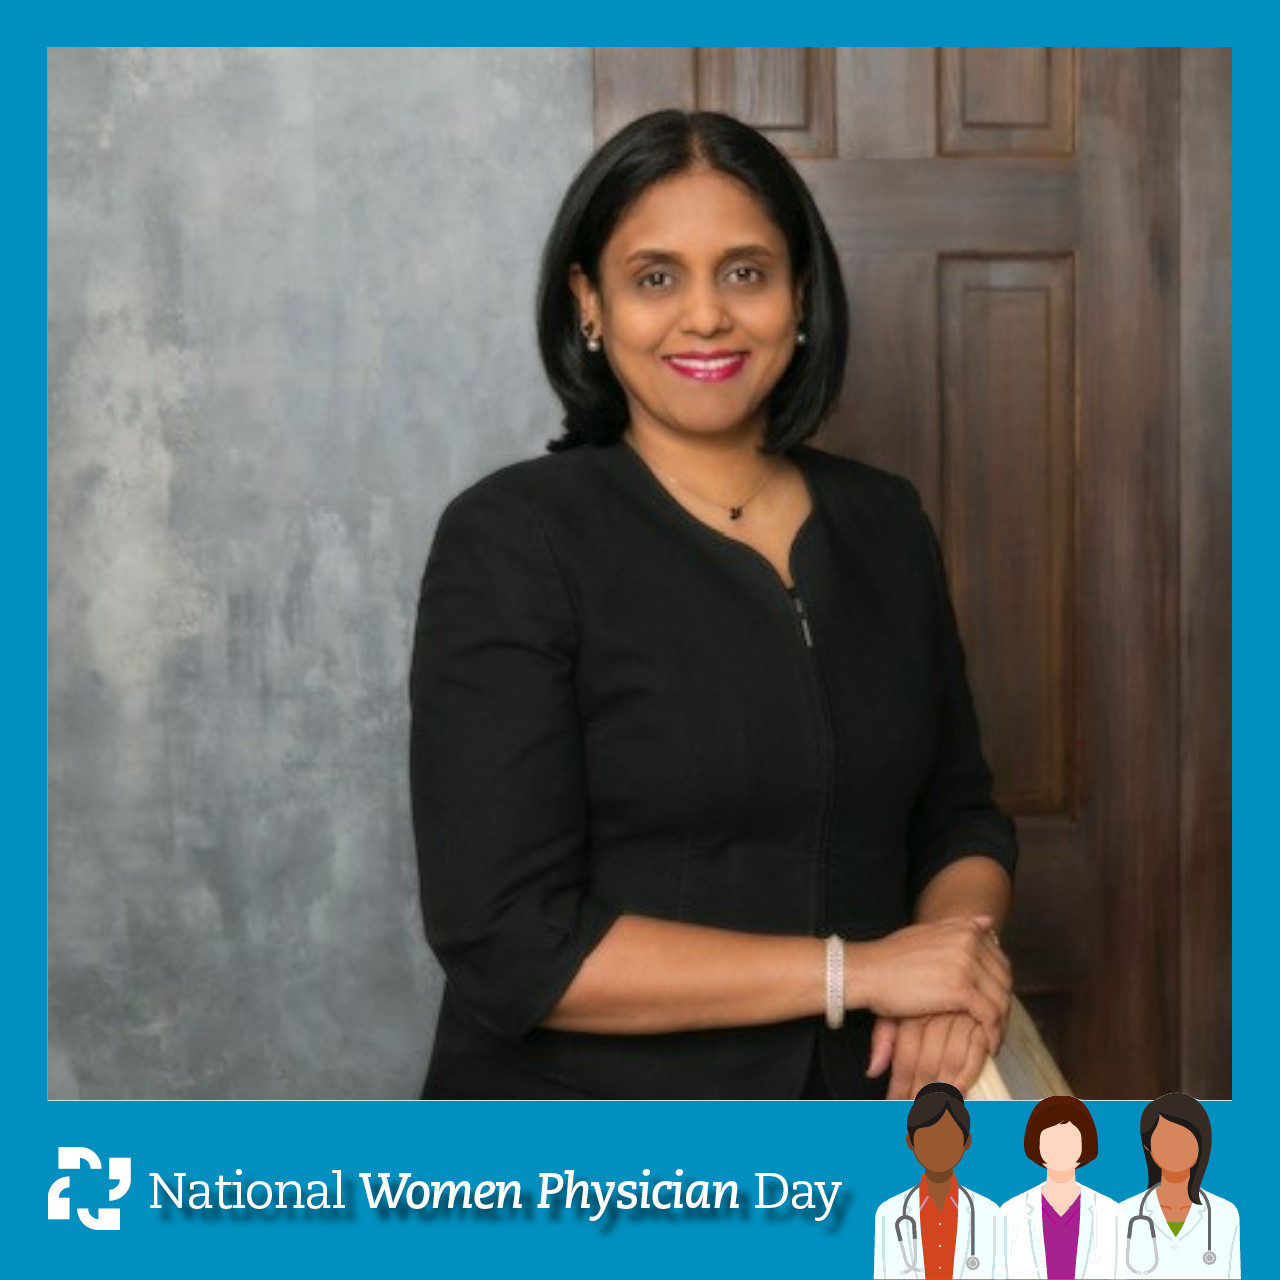 Thoughts on National Women Physician Day. We have work to do.  @doctorsforfertility